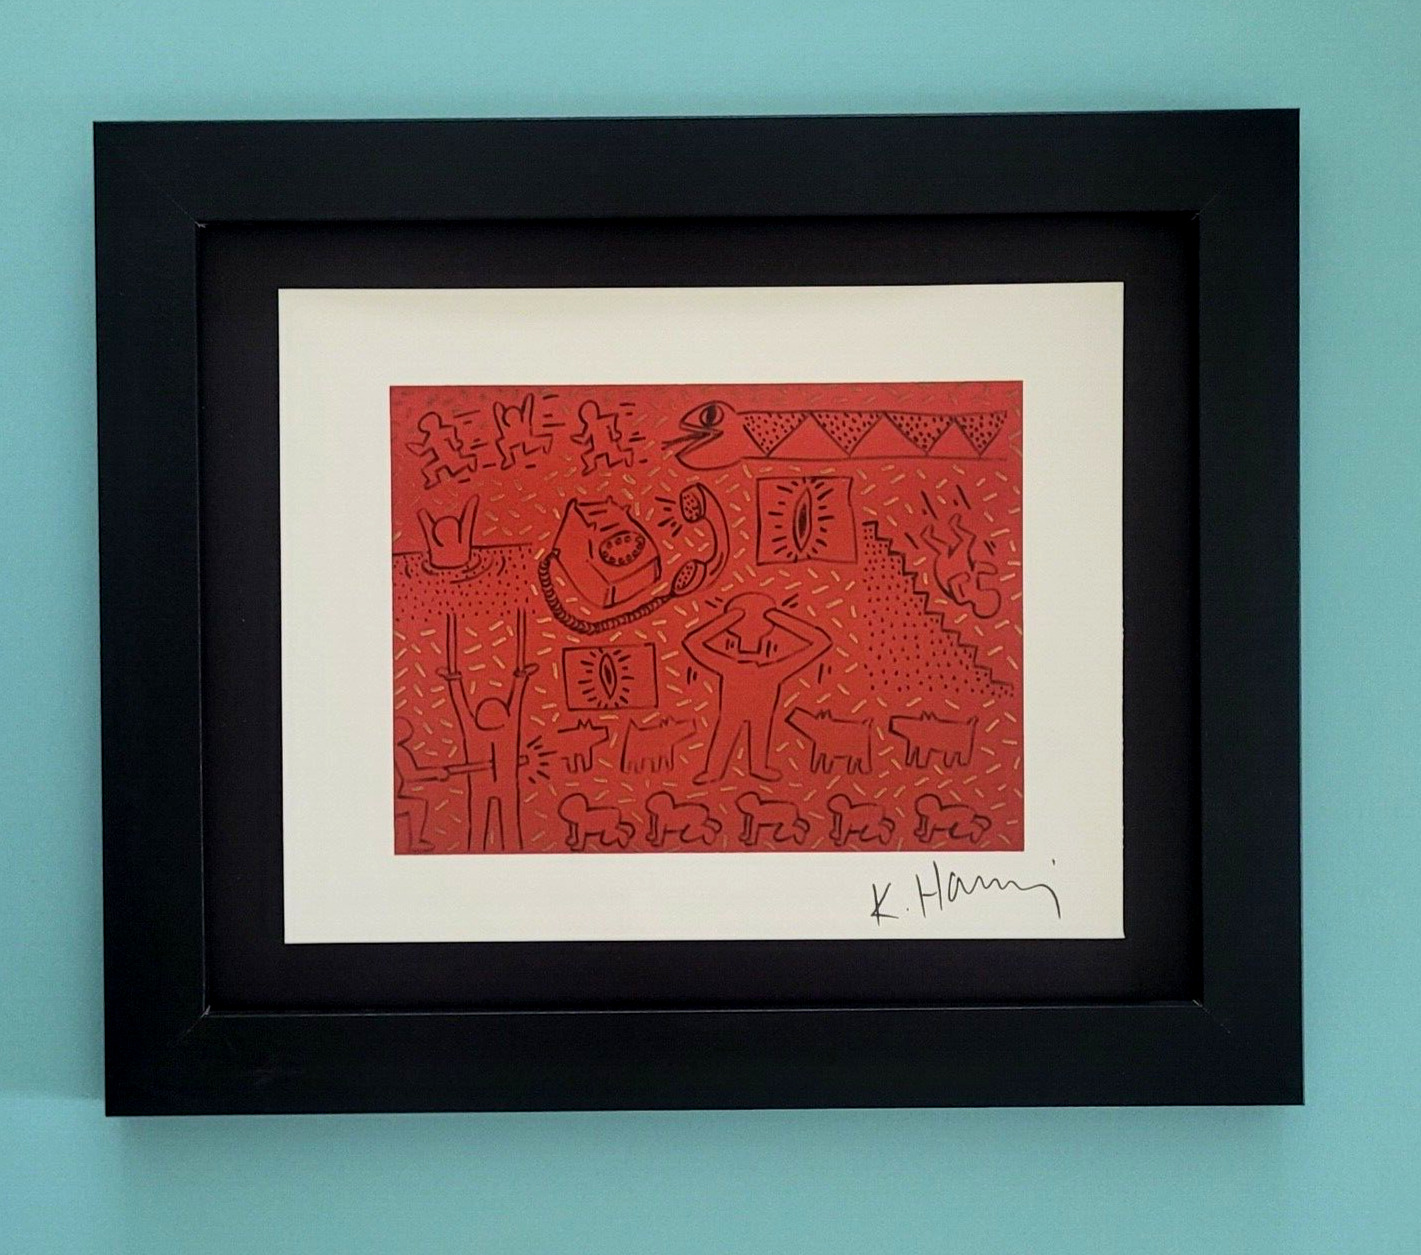 KEITH HARING + SIGNED VINTAGE 1989 PRINT FRAMED + BUY IT NOW